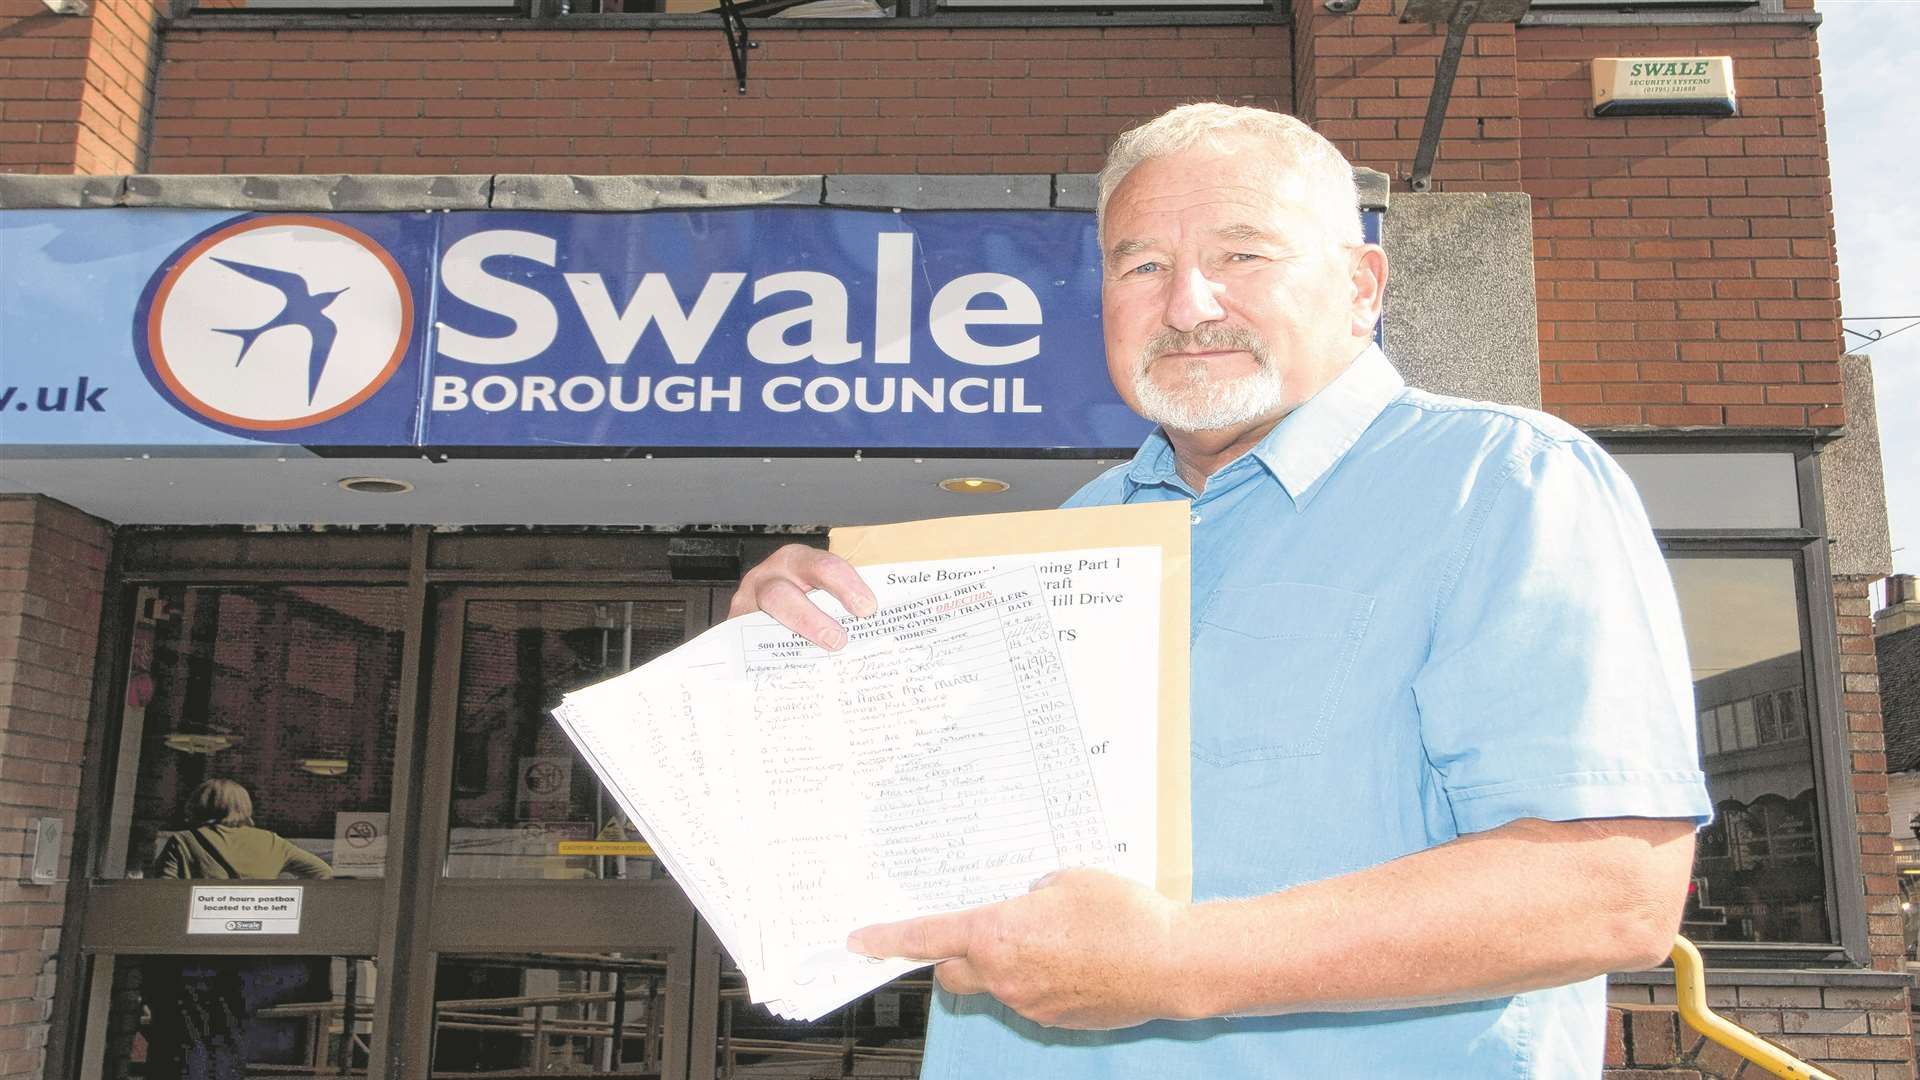 Minster resident Alan Bengall presenting a petition to Swale council at its offices in East Street, Sittingbourne over plans to build 500 new homes on Sheppey